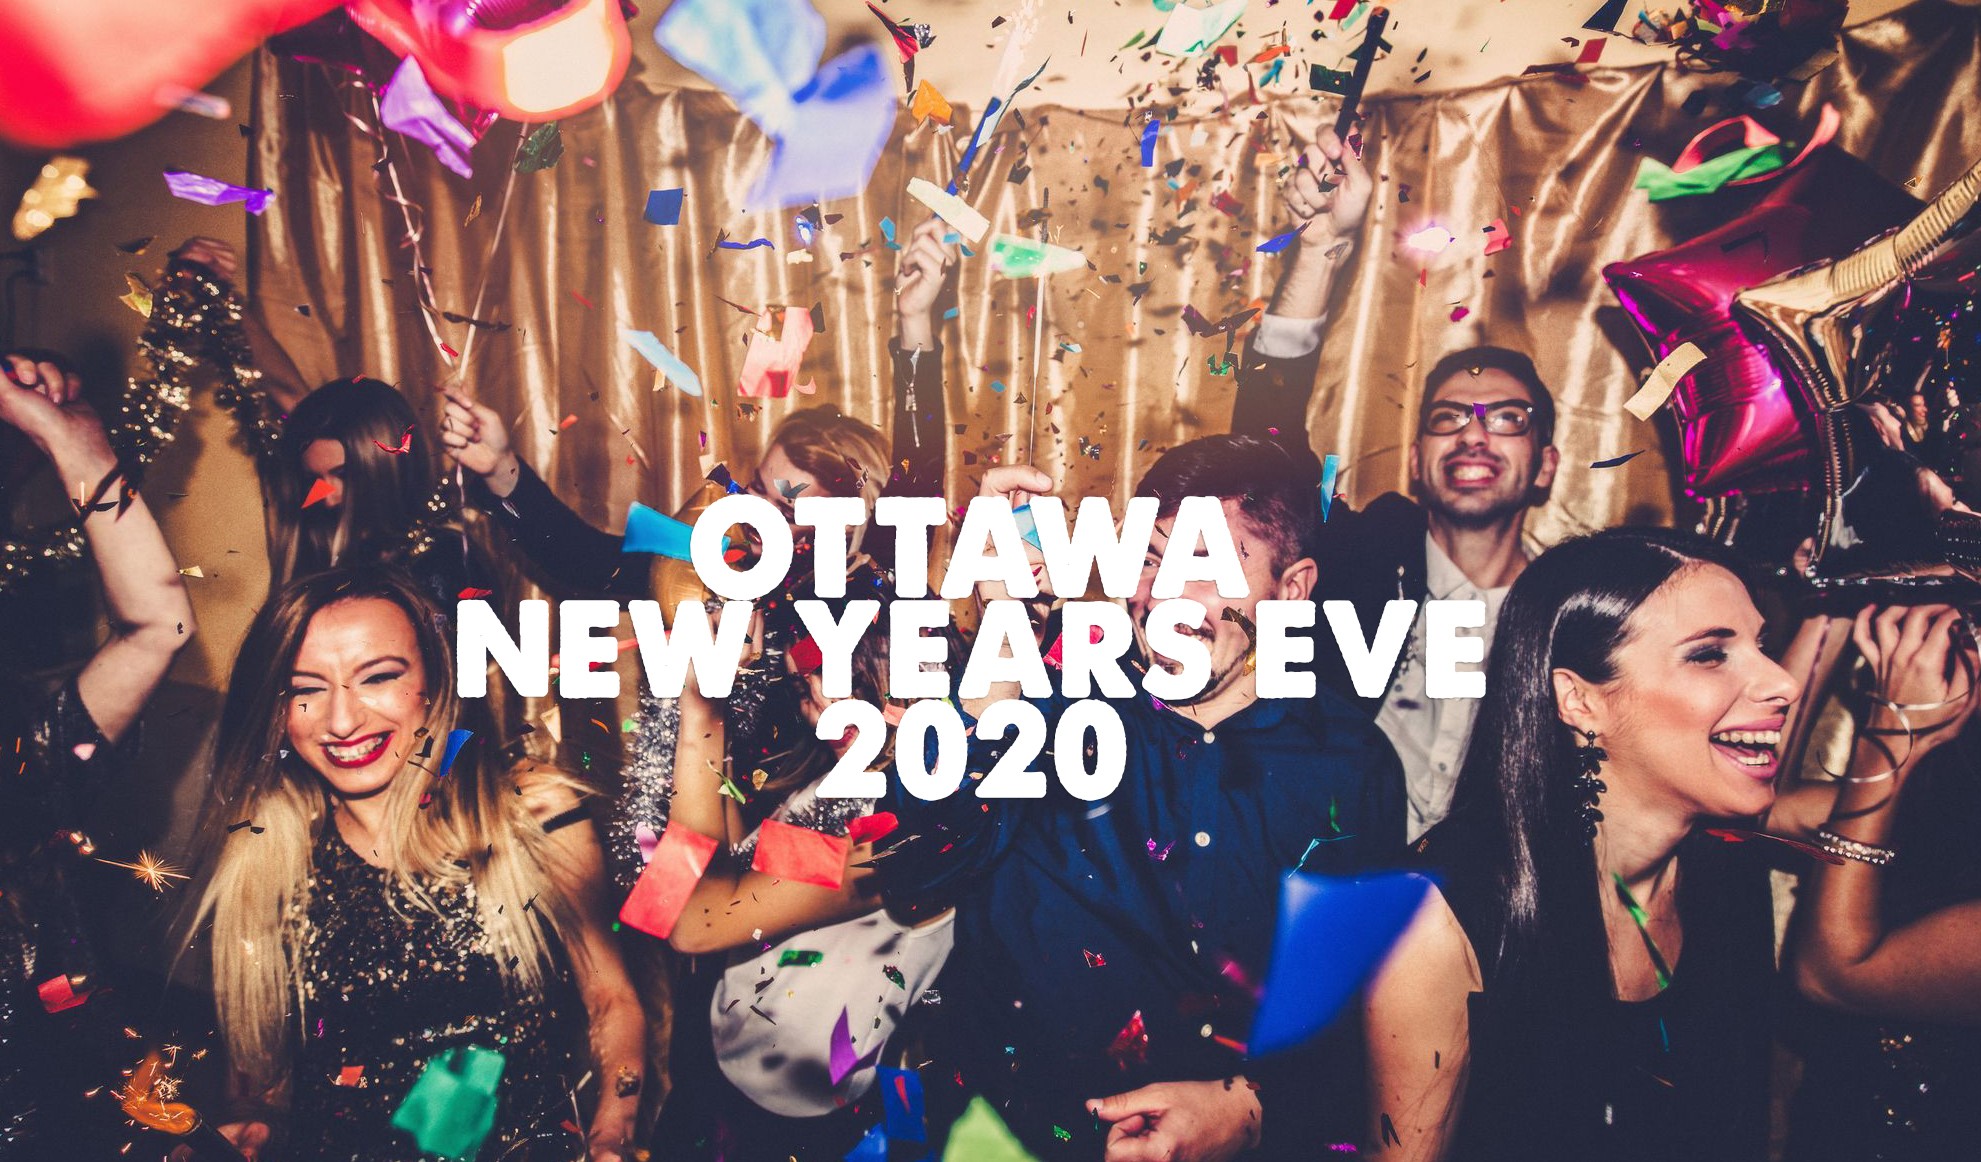 Ottawa New Years Eve Parties 2020 Tues Dec 31